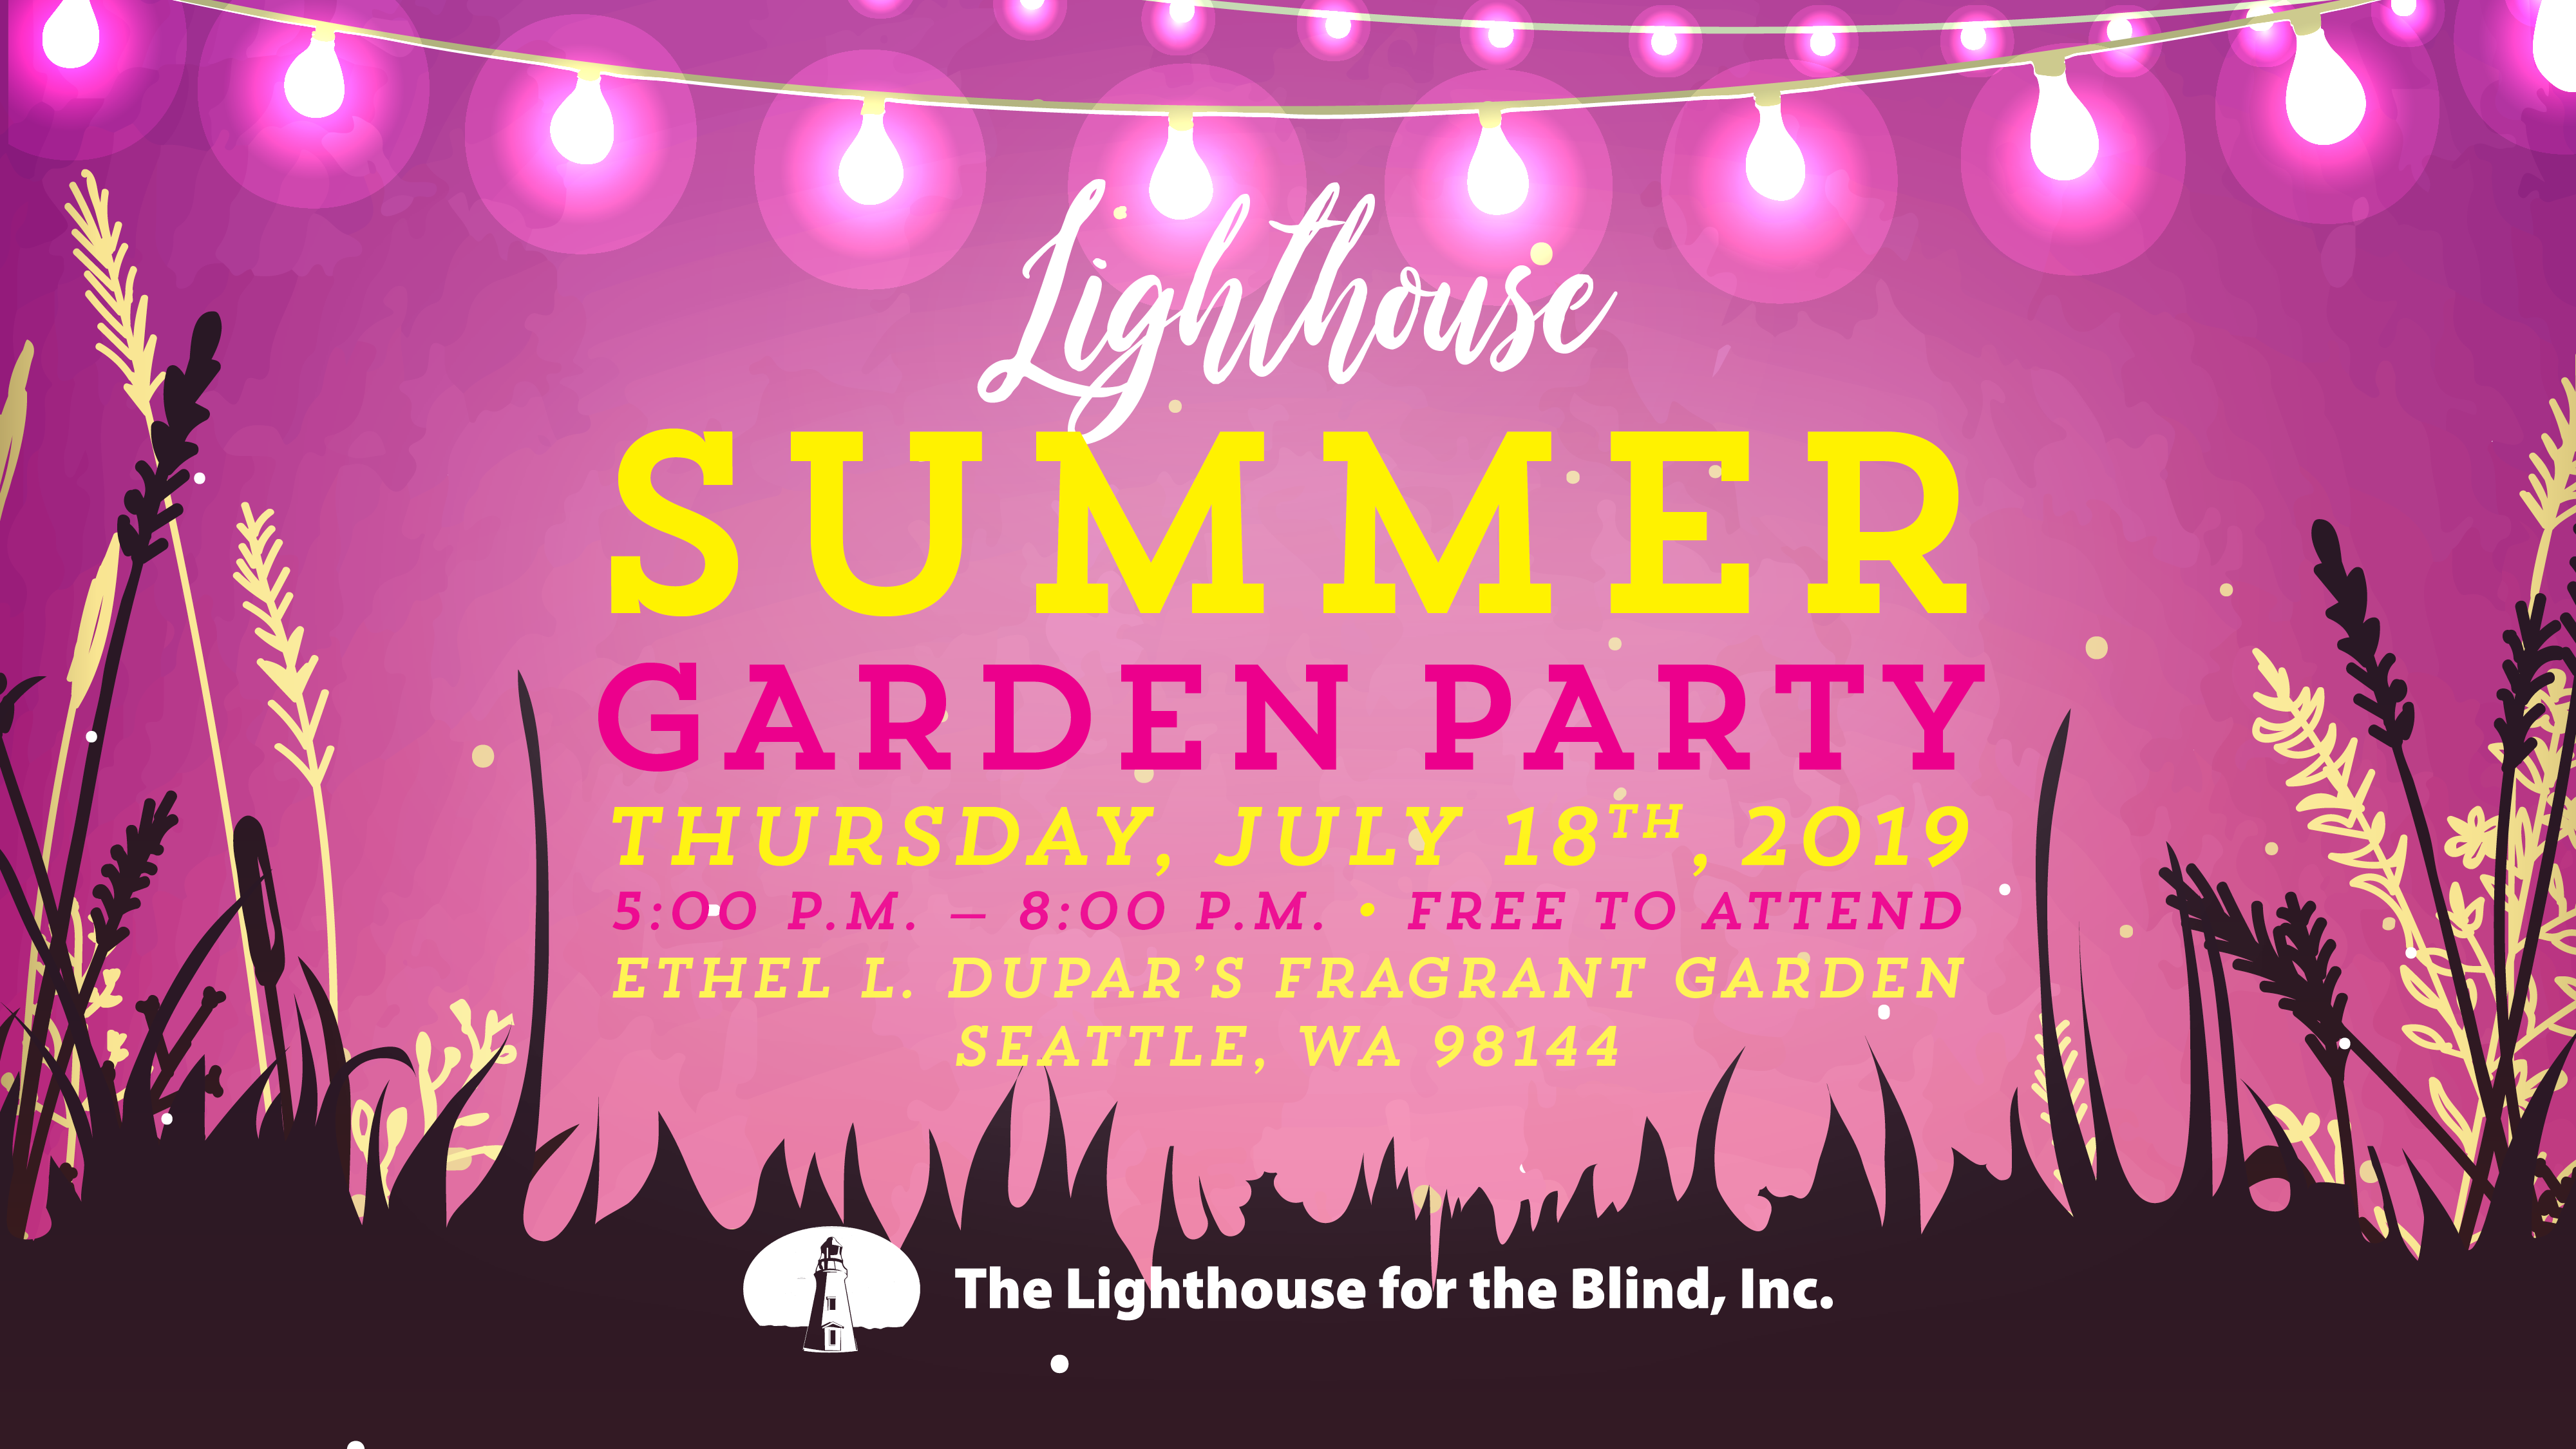 Lighthouse Summer Garden Party graphic